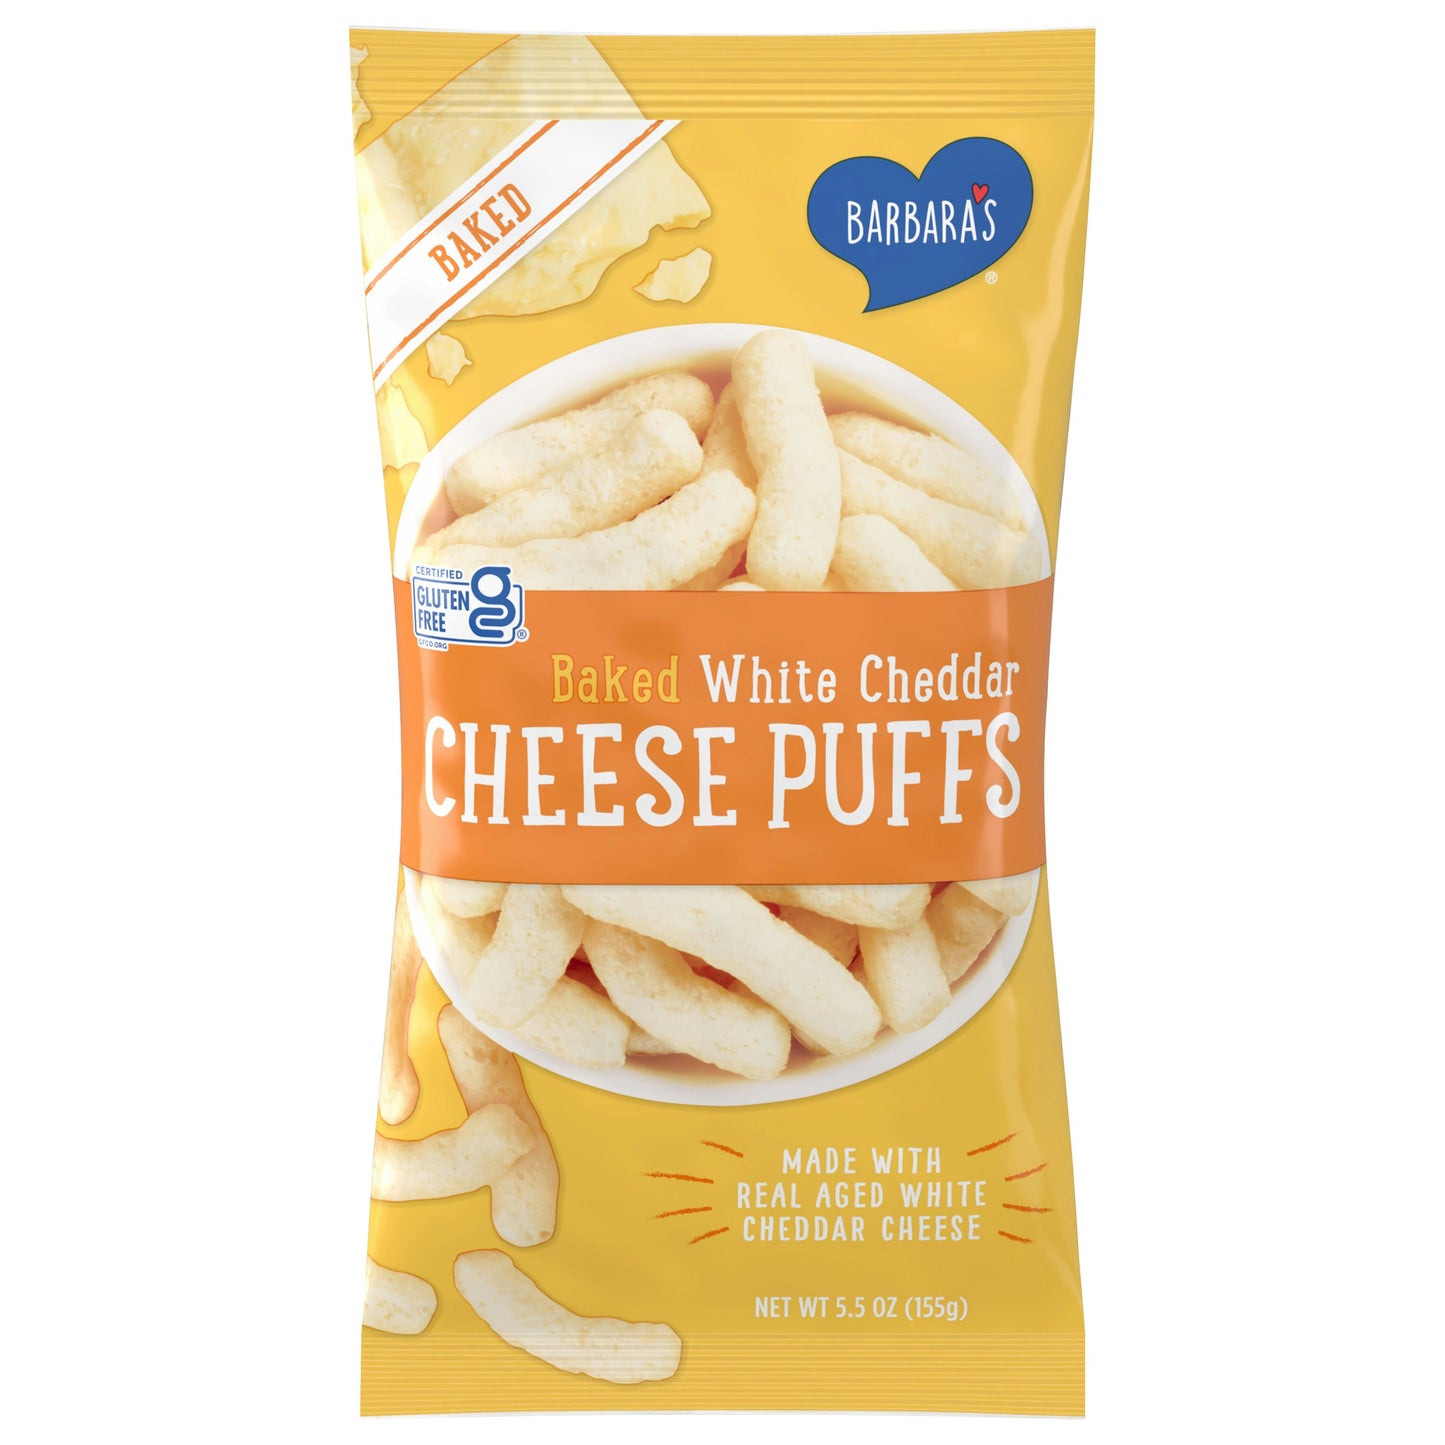 Barbaras Cheese Puff Baked White Cheddar 5.5 Oz Pack of 12